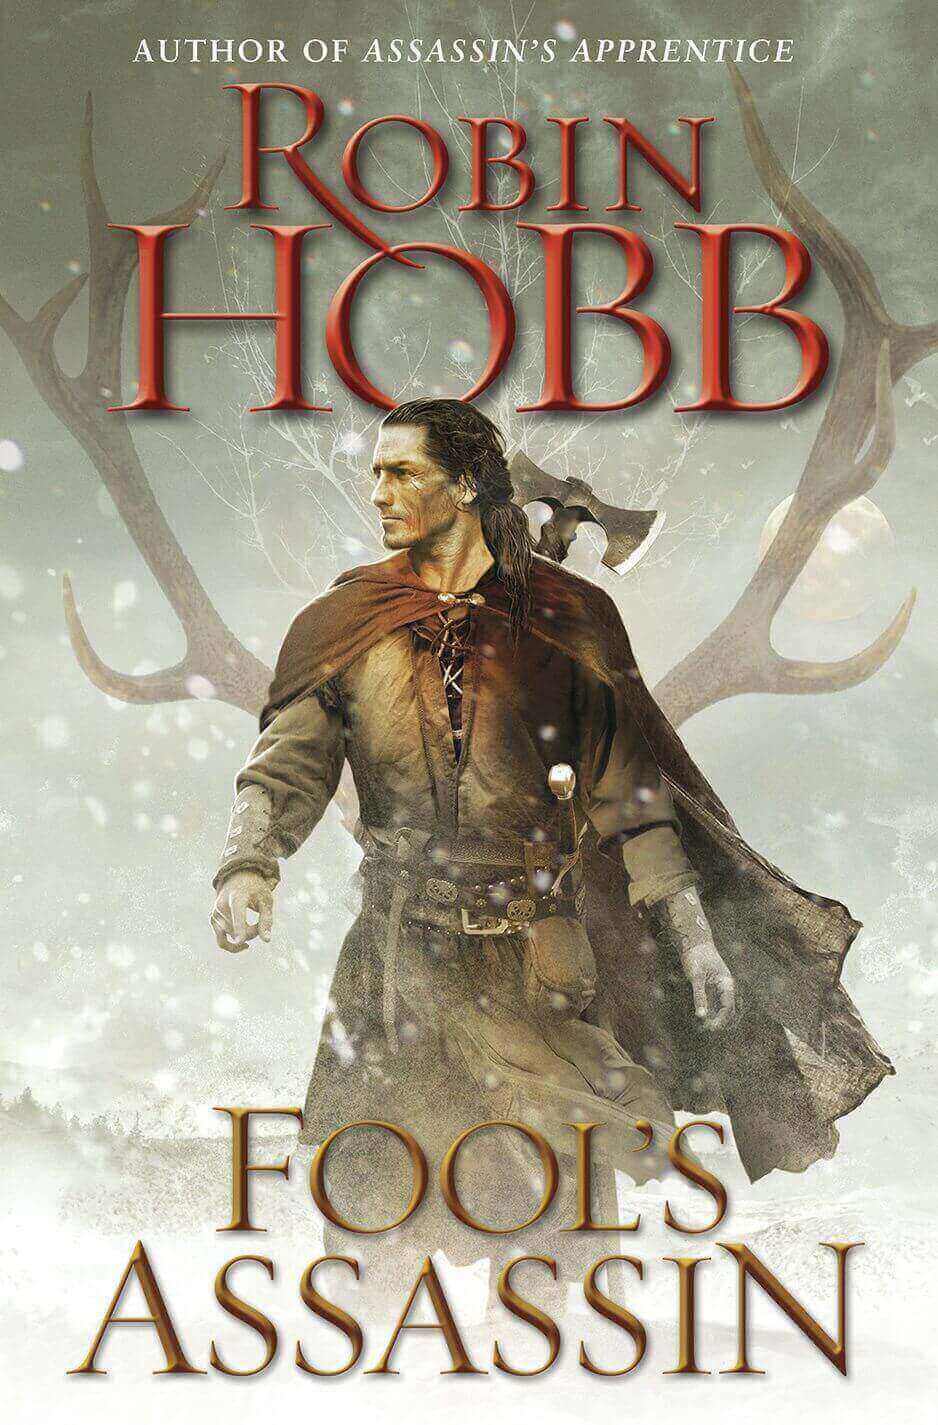 Fool’s Quest by Robin Hobb